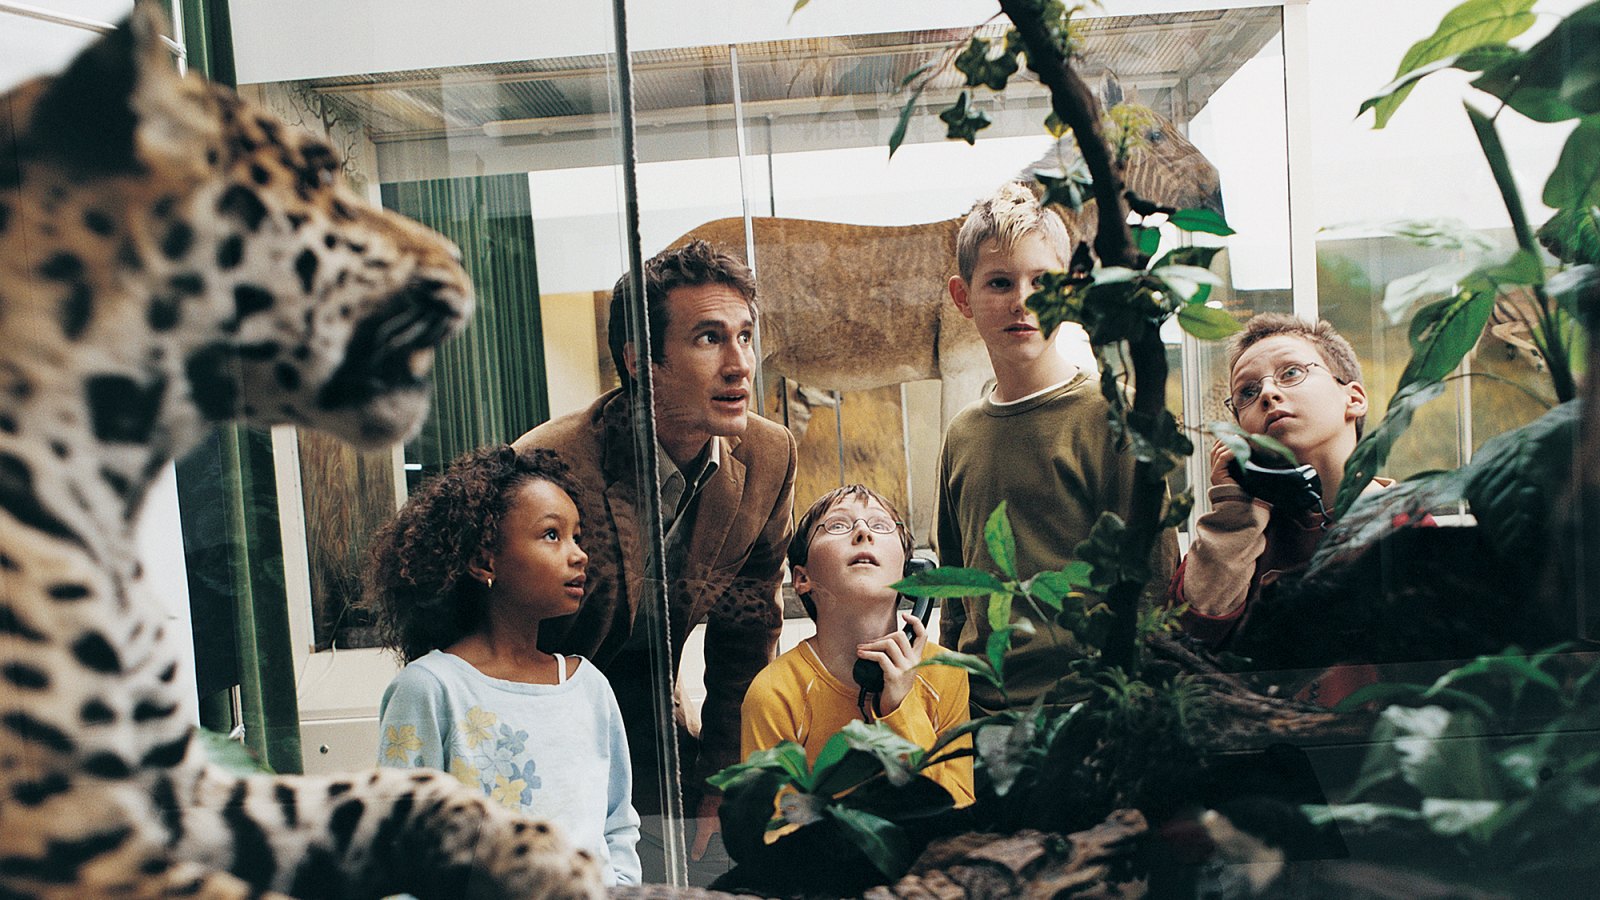 Male Teacher and Primary School Students in a Museum Looking at Animal Models in a Vitrine